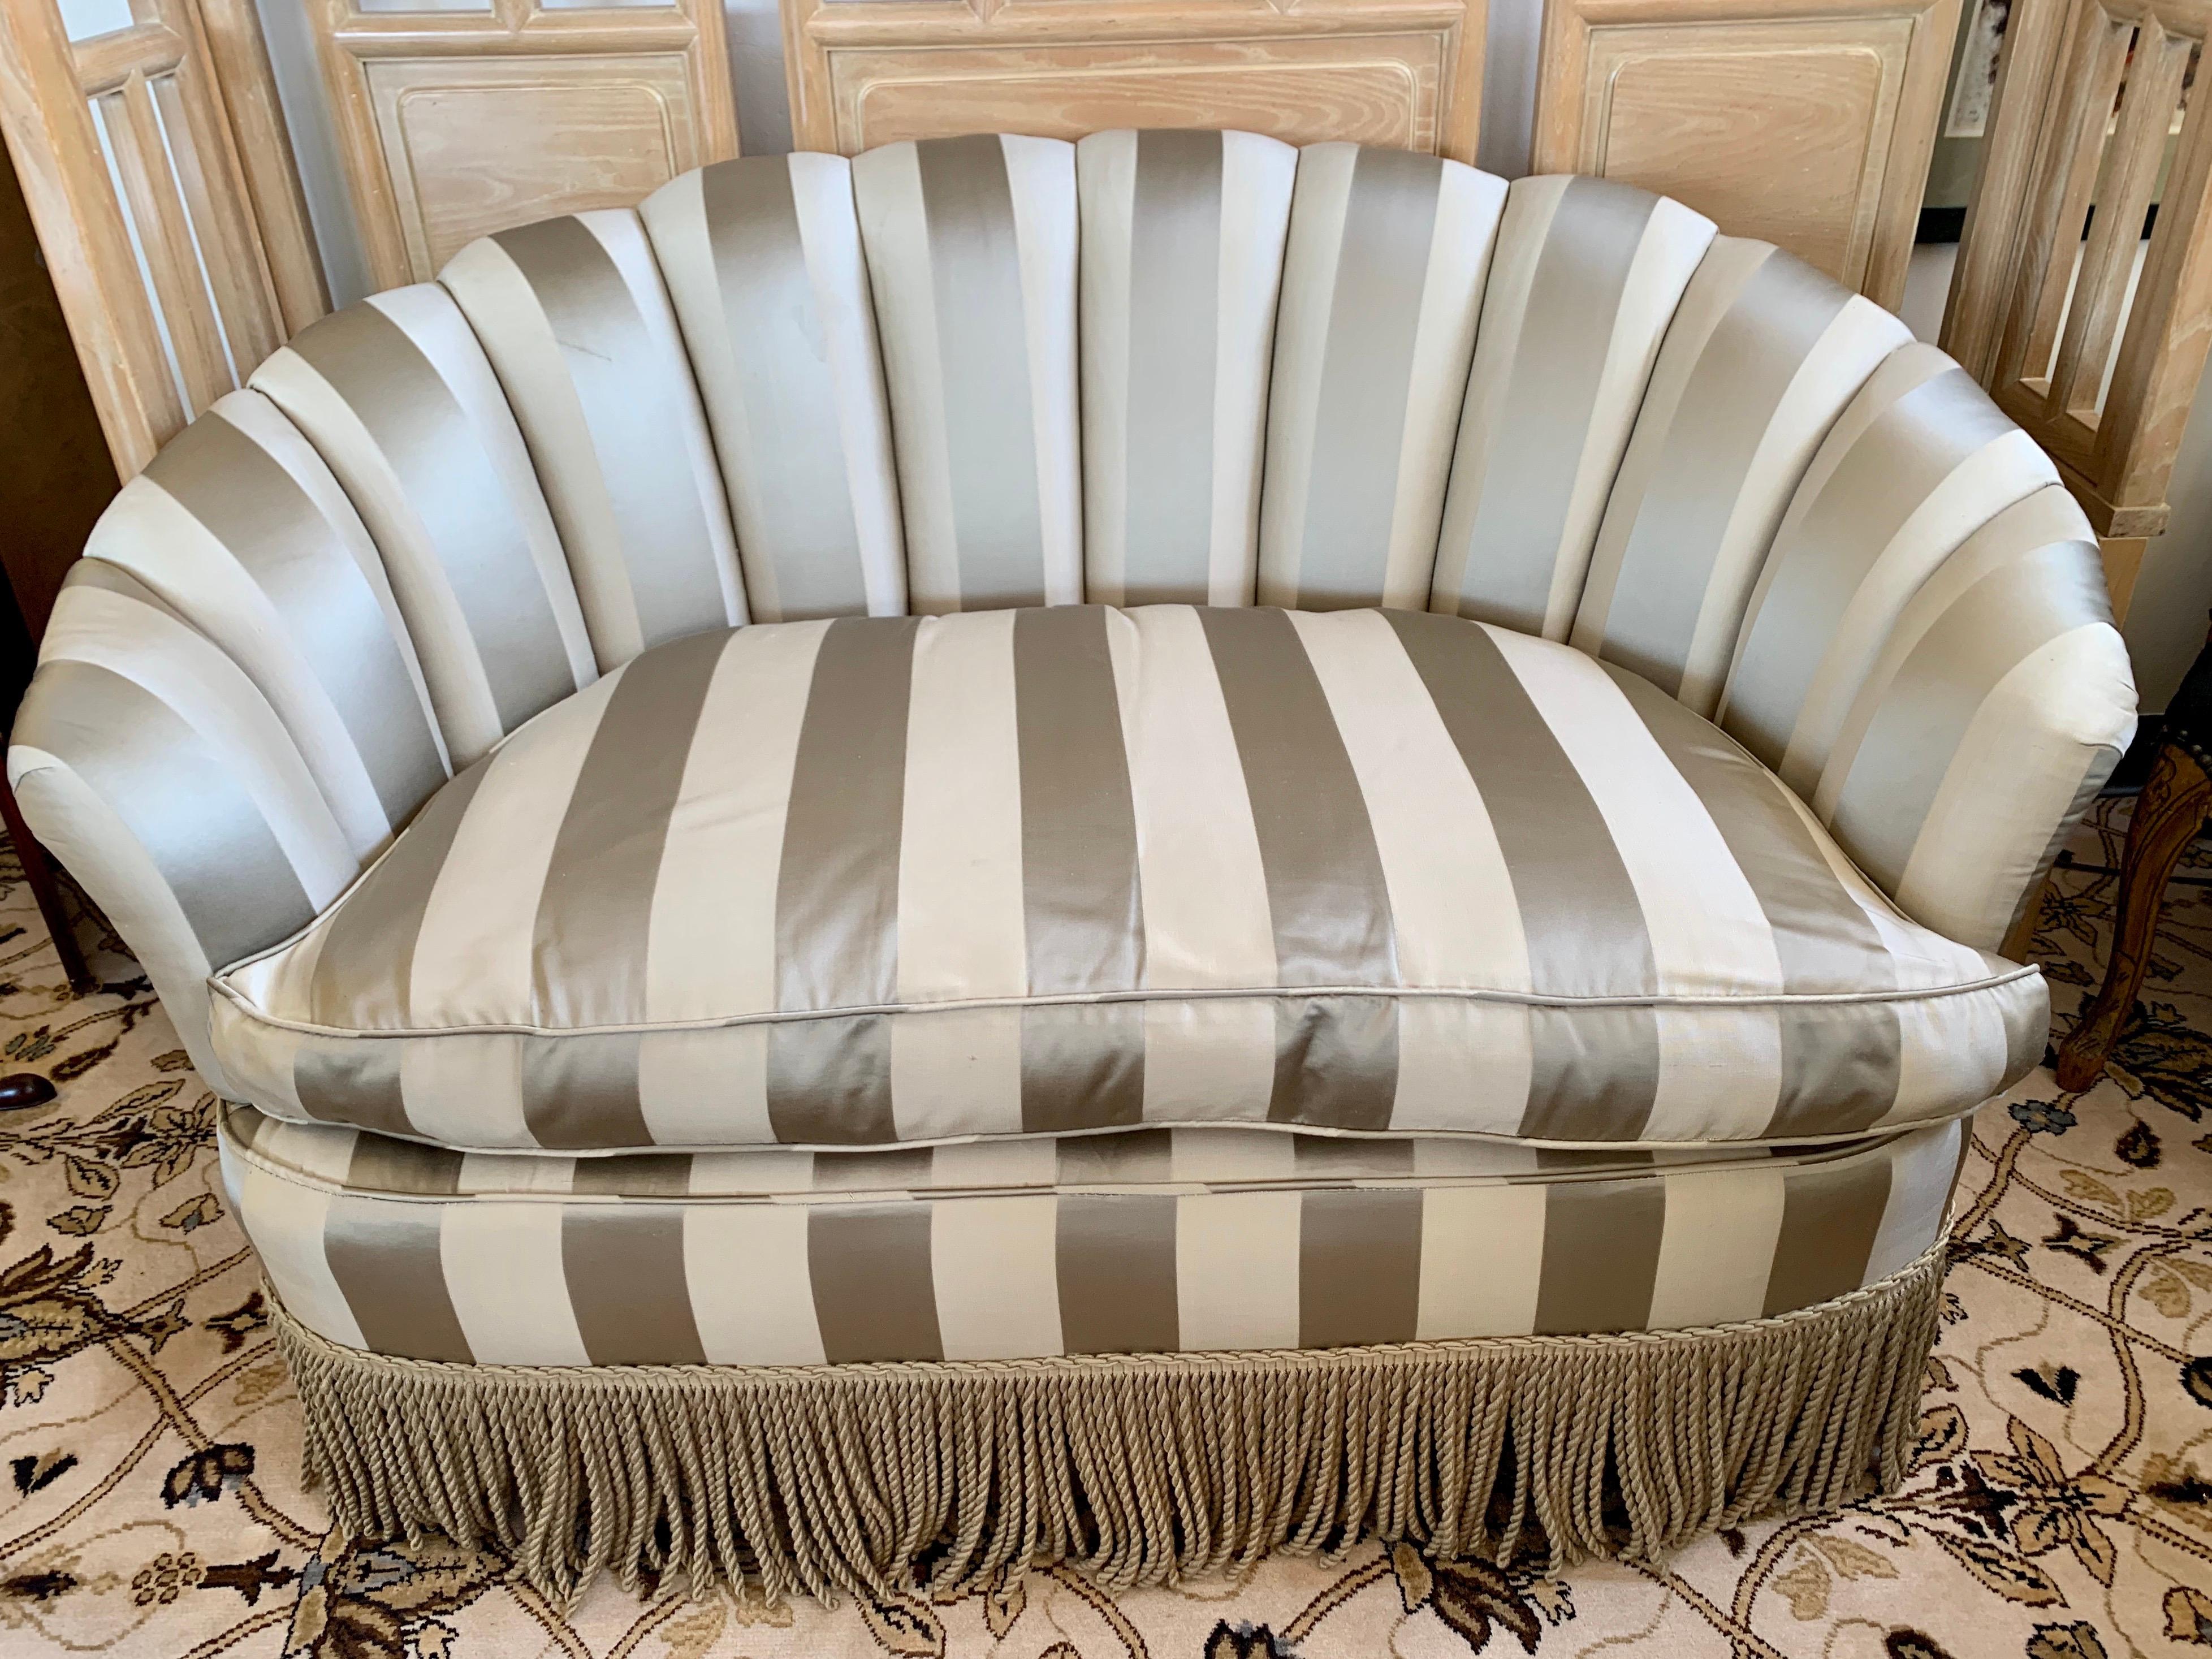 Impeccably upholstered silk striped curved loveseat with channel back and coordinating tassel fringe.
Features 8-way hand tied construction for the perfect level of comfort and support.
 